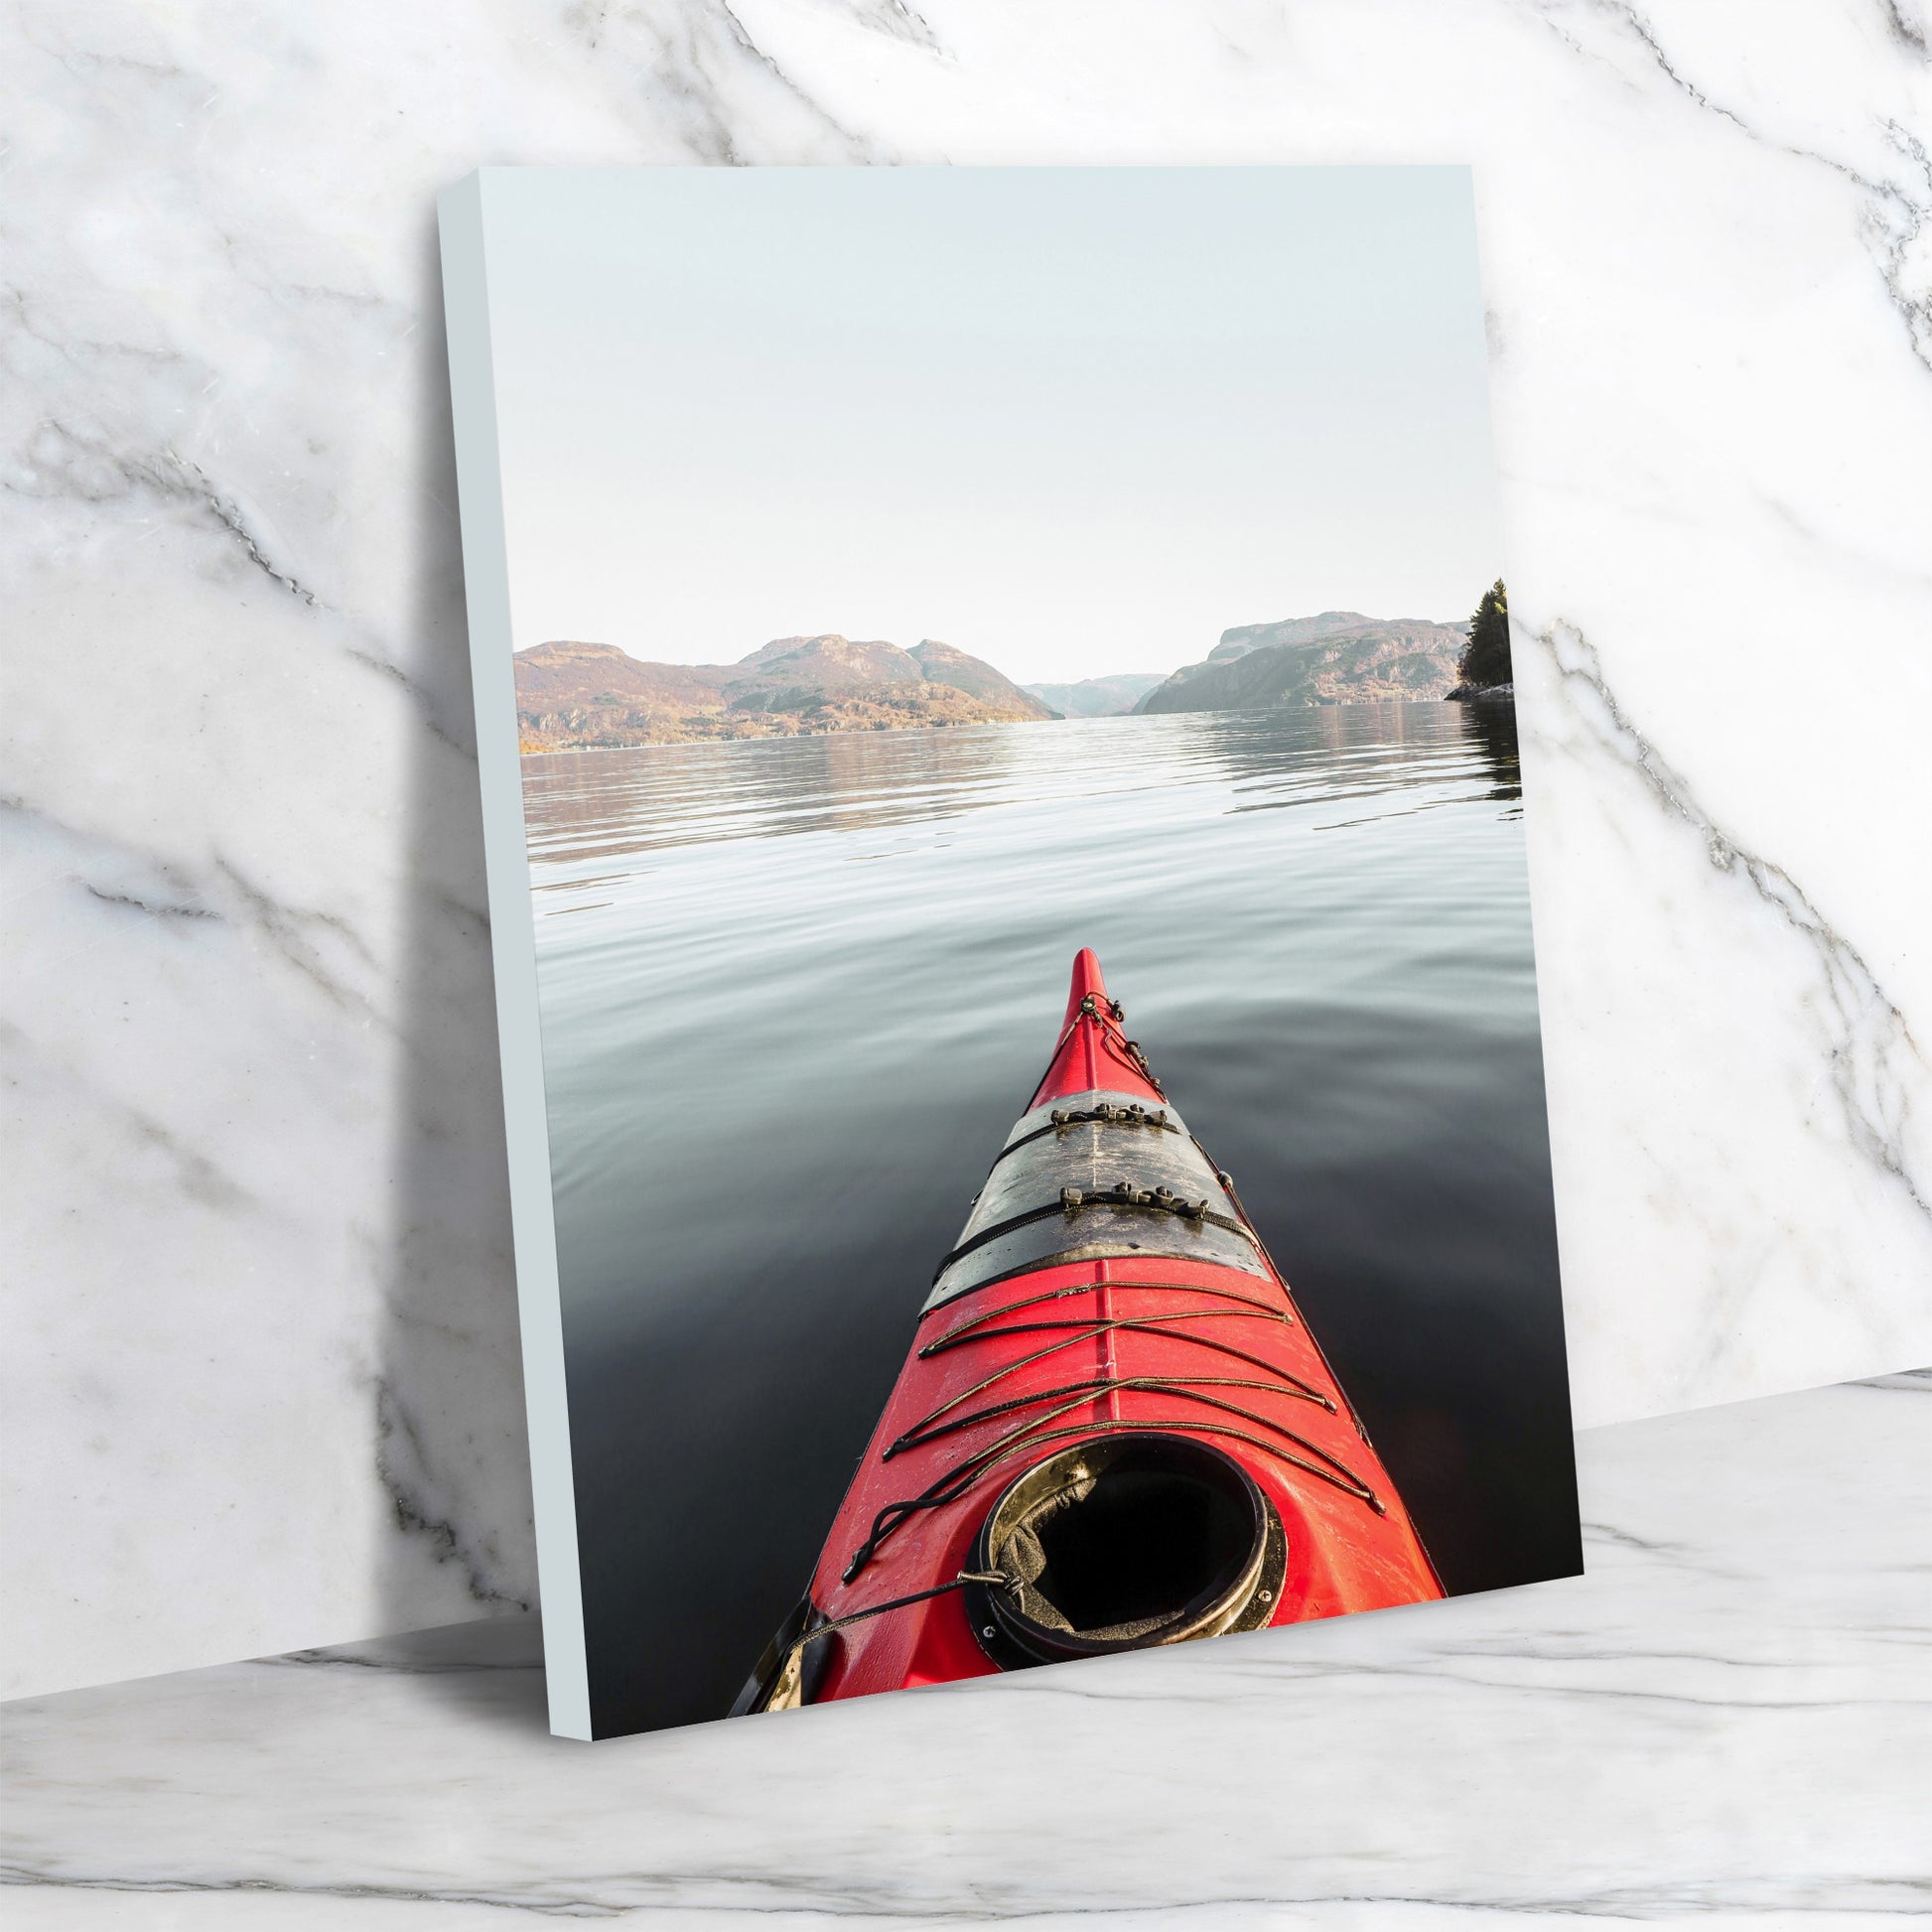 The Red Kayak In Norway by Henrike Schenk - Wrapped Canvas